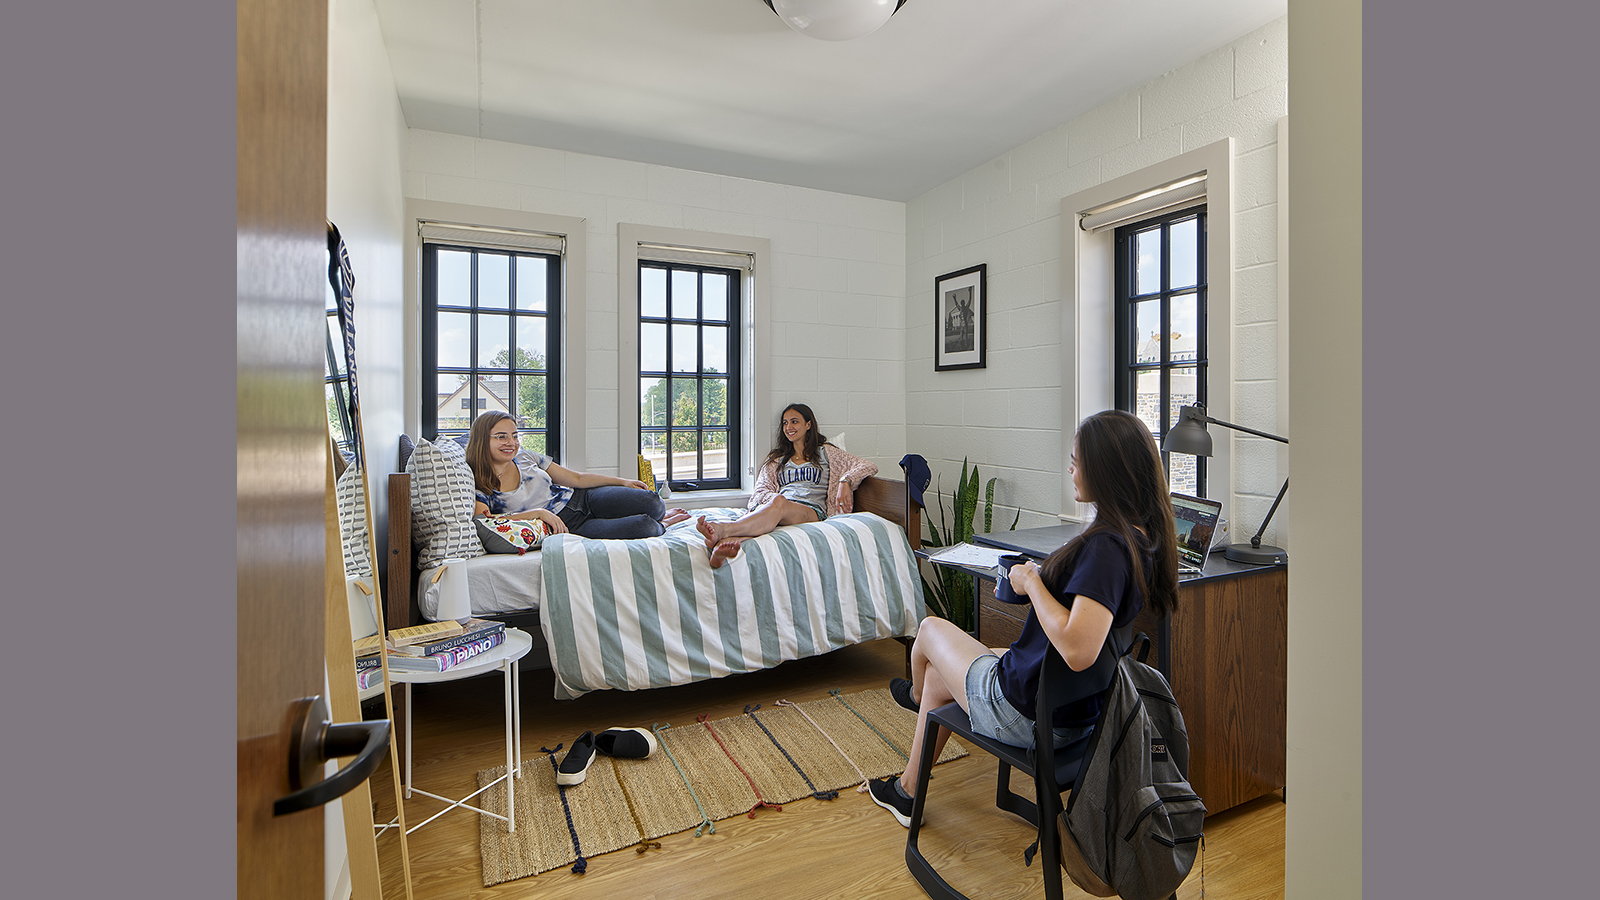 3 Villanova students enjoy their dormroom, two sit on the bed while one sits in a chair facing them,